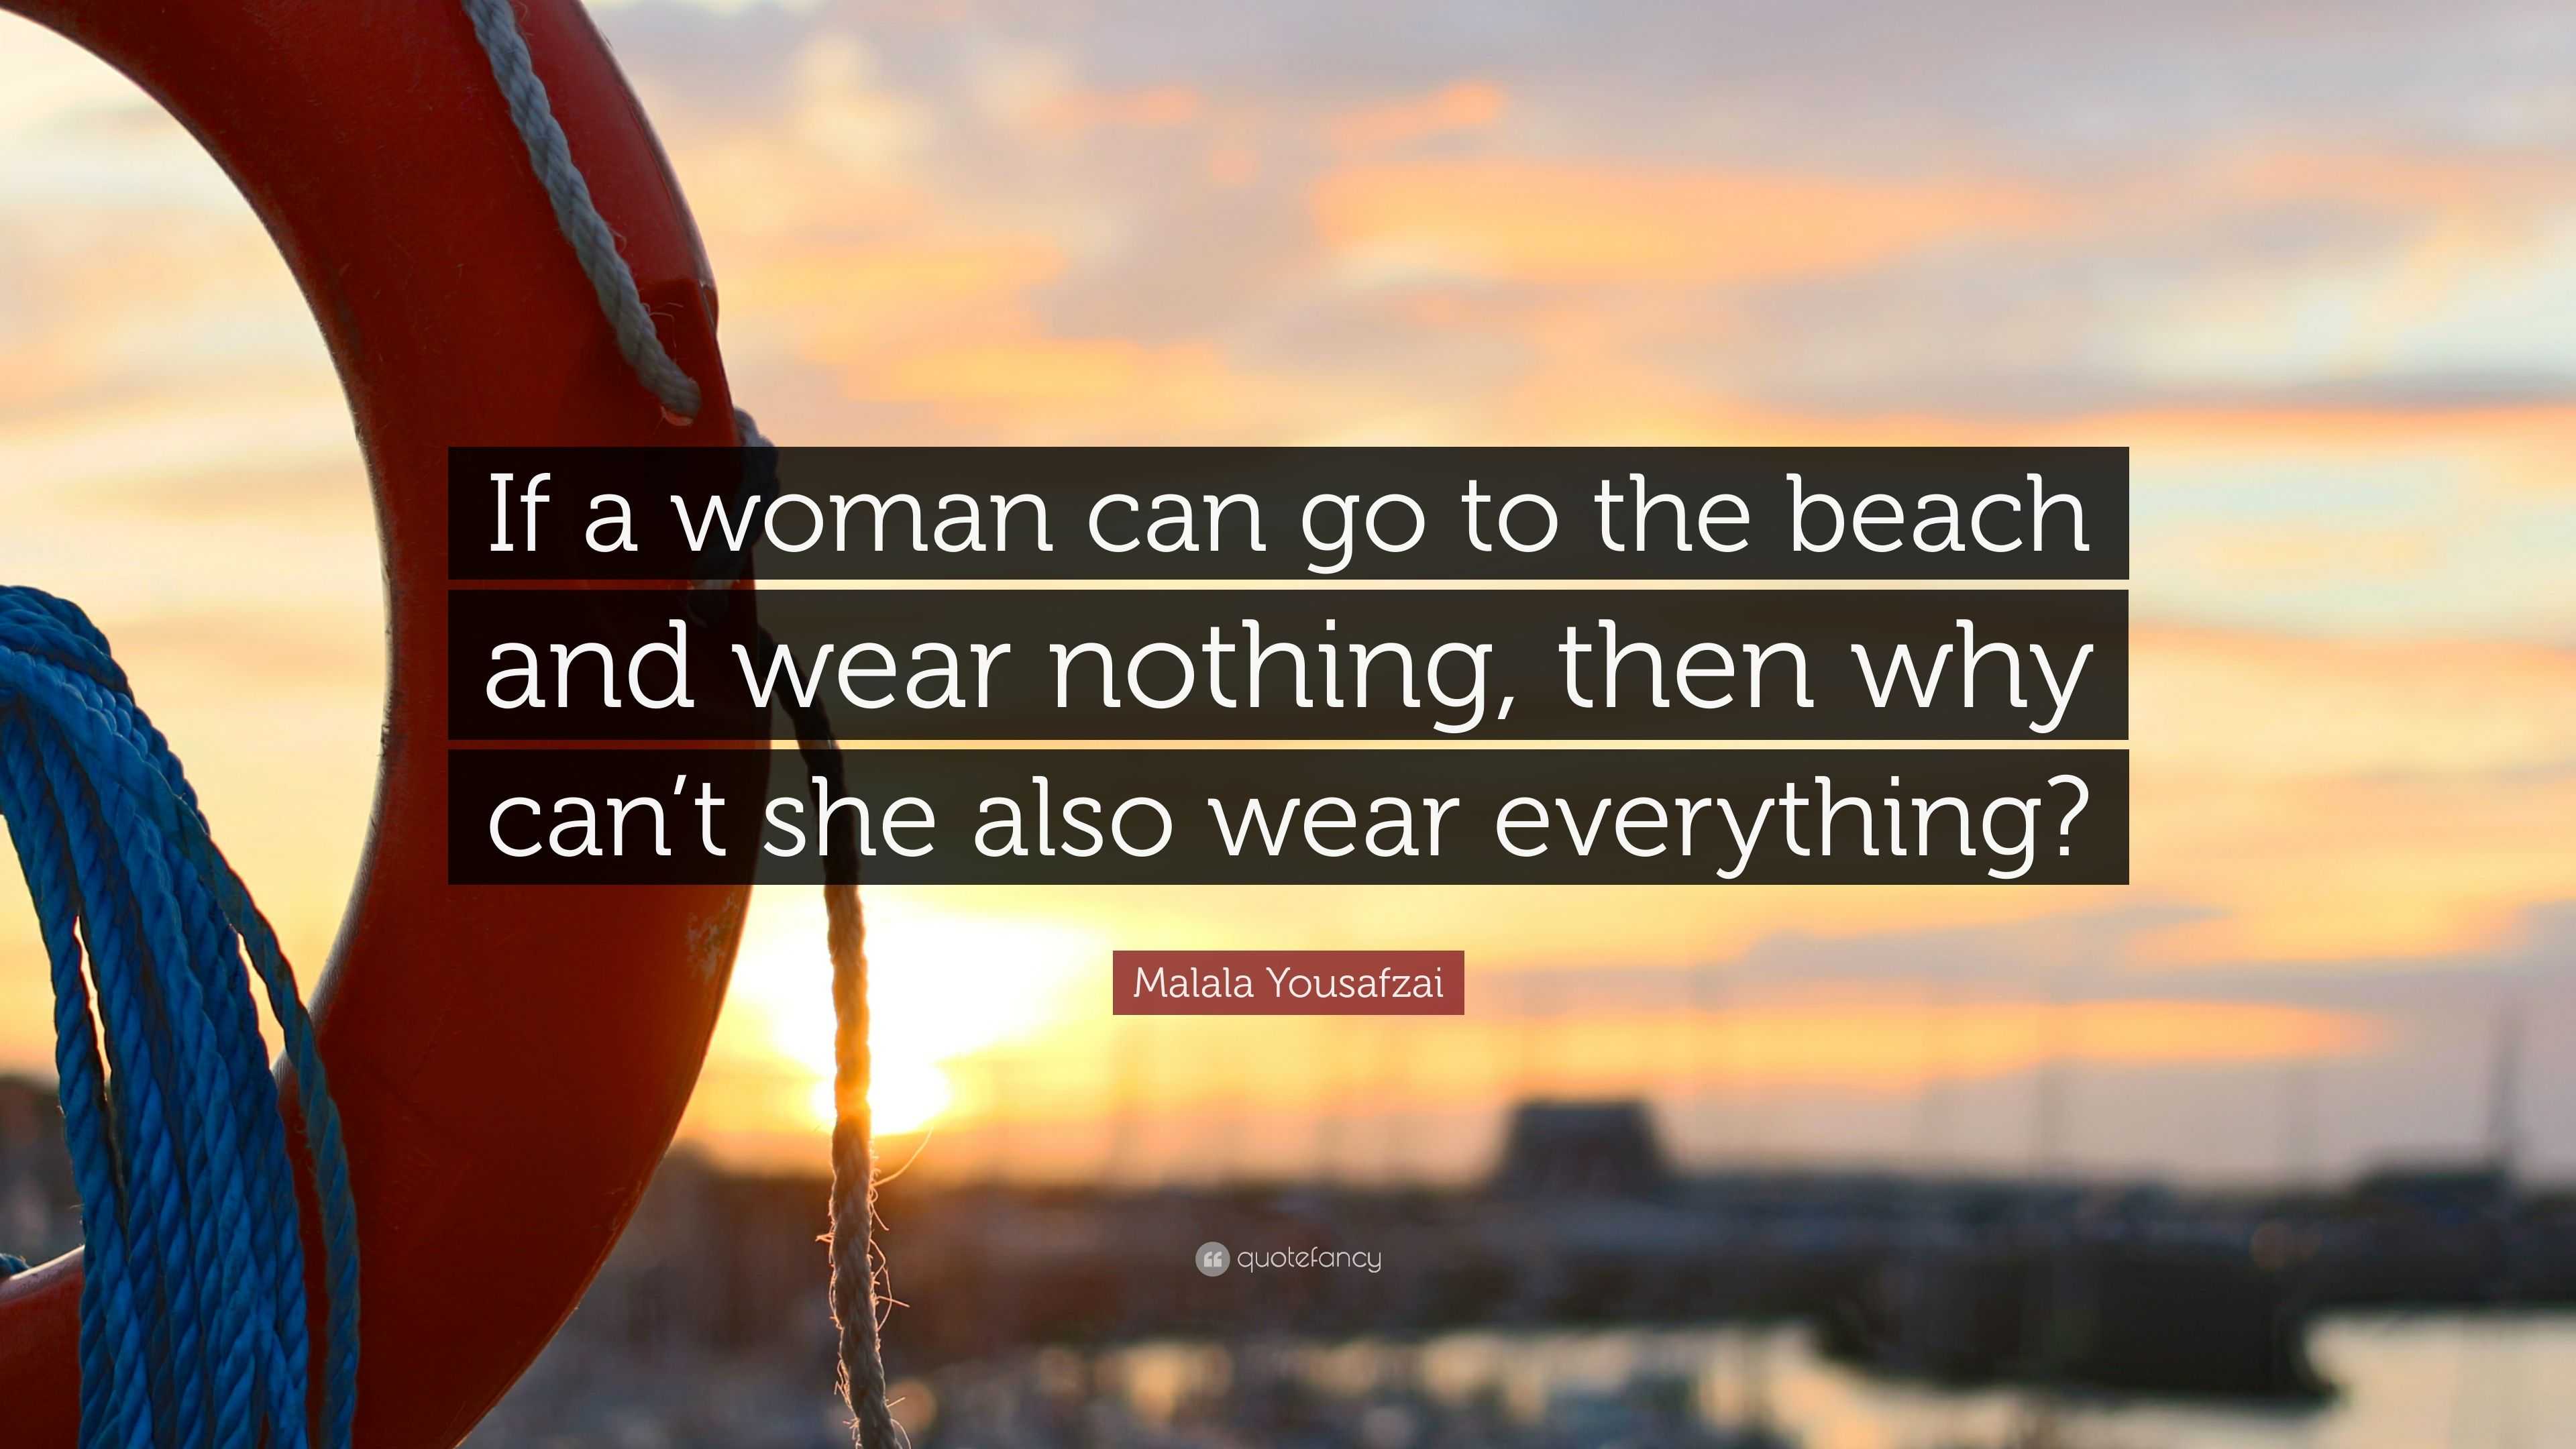 Malala Yousafzai Quote: “If a woman can go to the beach and wear nothing,  then why